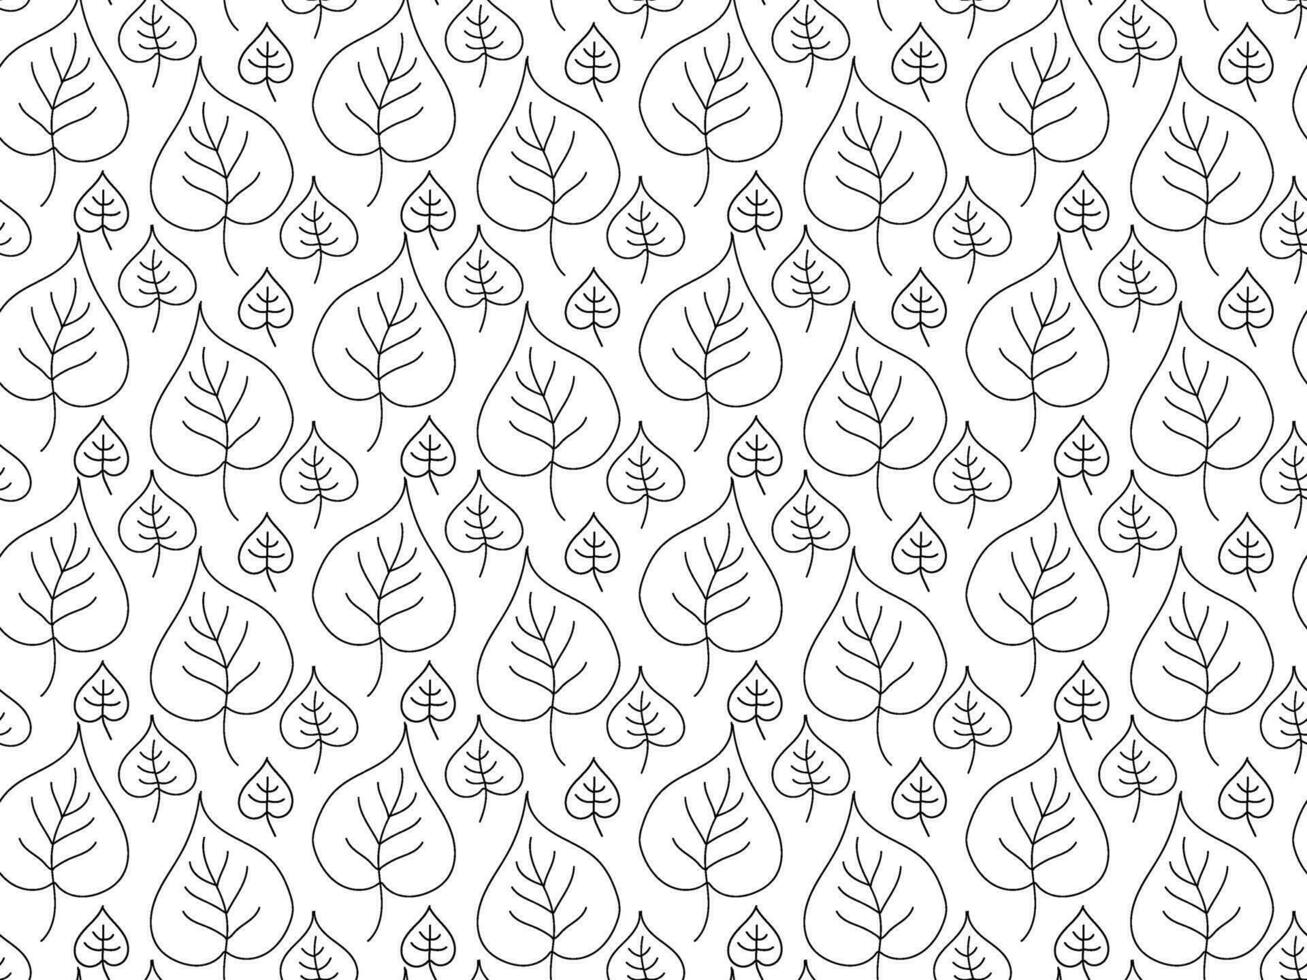 Seamless black and white doodle pattern of leaves vector